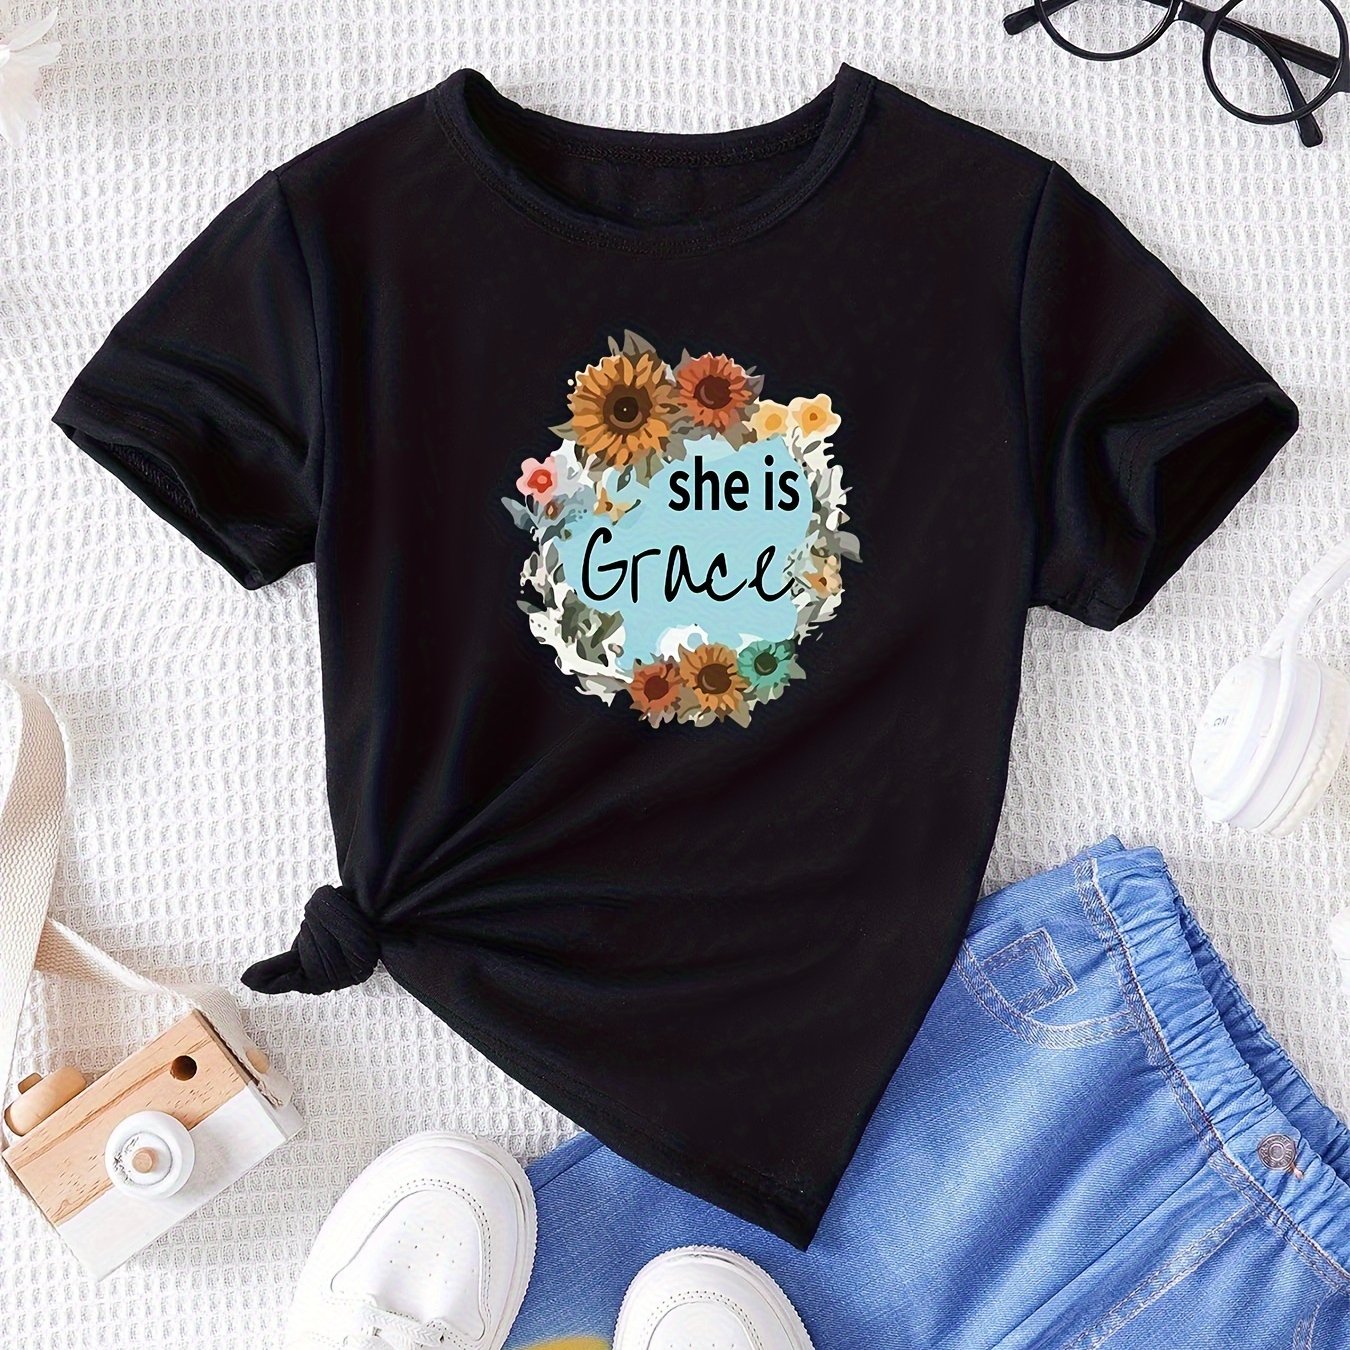 SHE IS GRACE Youth Christian T-shirt claimedbygoddesigns